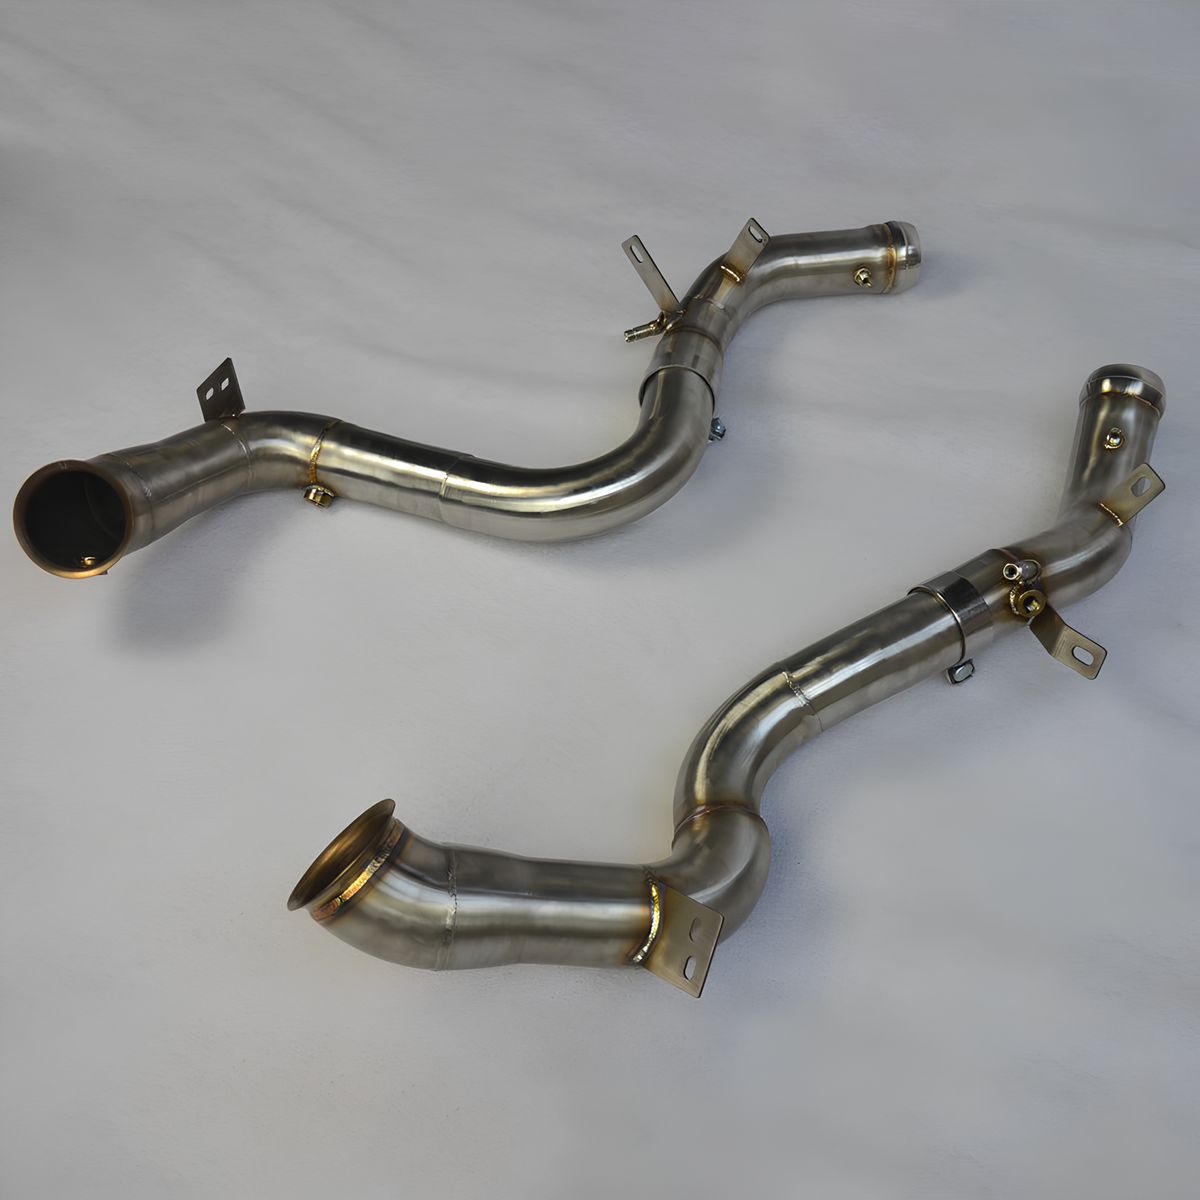 Rstype catless Downpipe Mercedes Benz E63 E63s AMG 4.OT Downpipe kit 2015 -2020